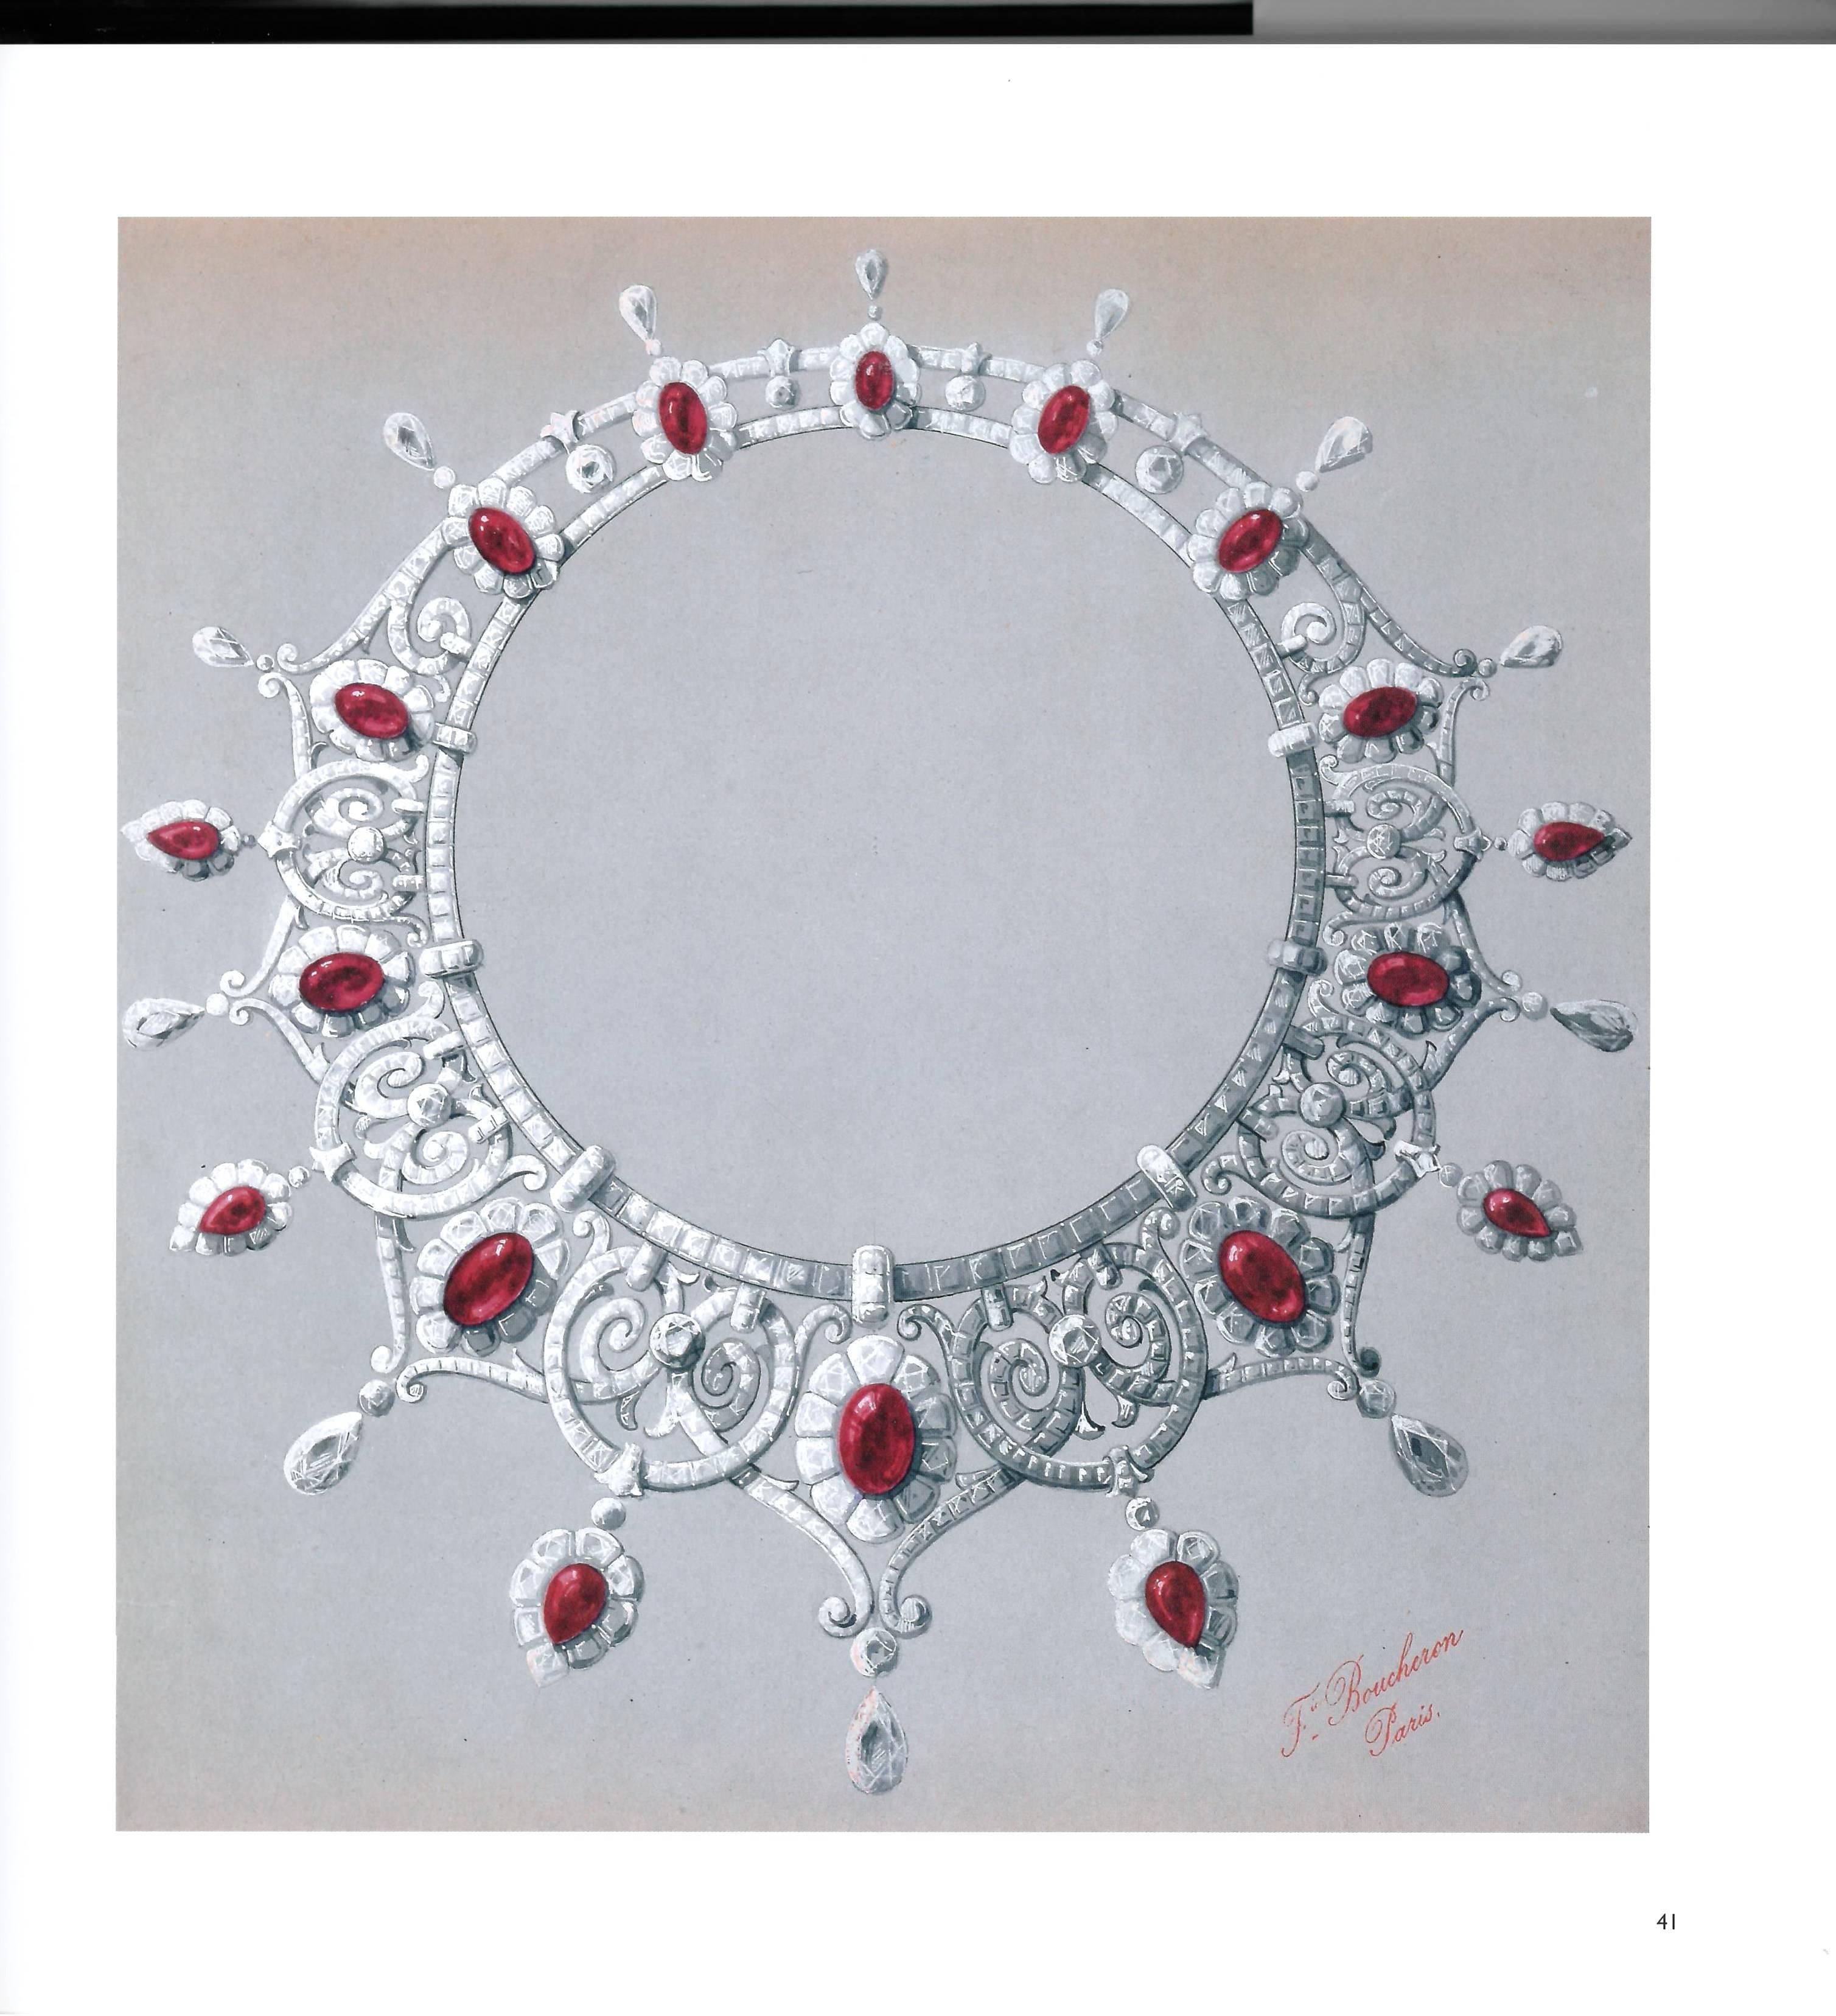 Though a quite recent publication this book is no longer in print and therefore scarce. The House of Boucheron has been one of the great Parisian jewellers since being founded in 1858. The author was given access to the company archives and it was